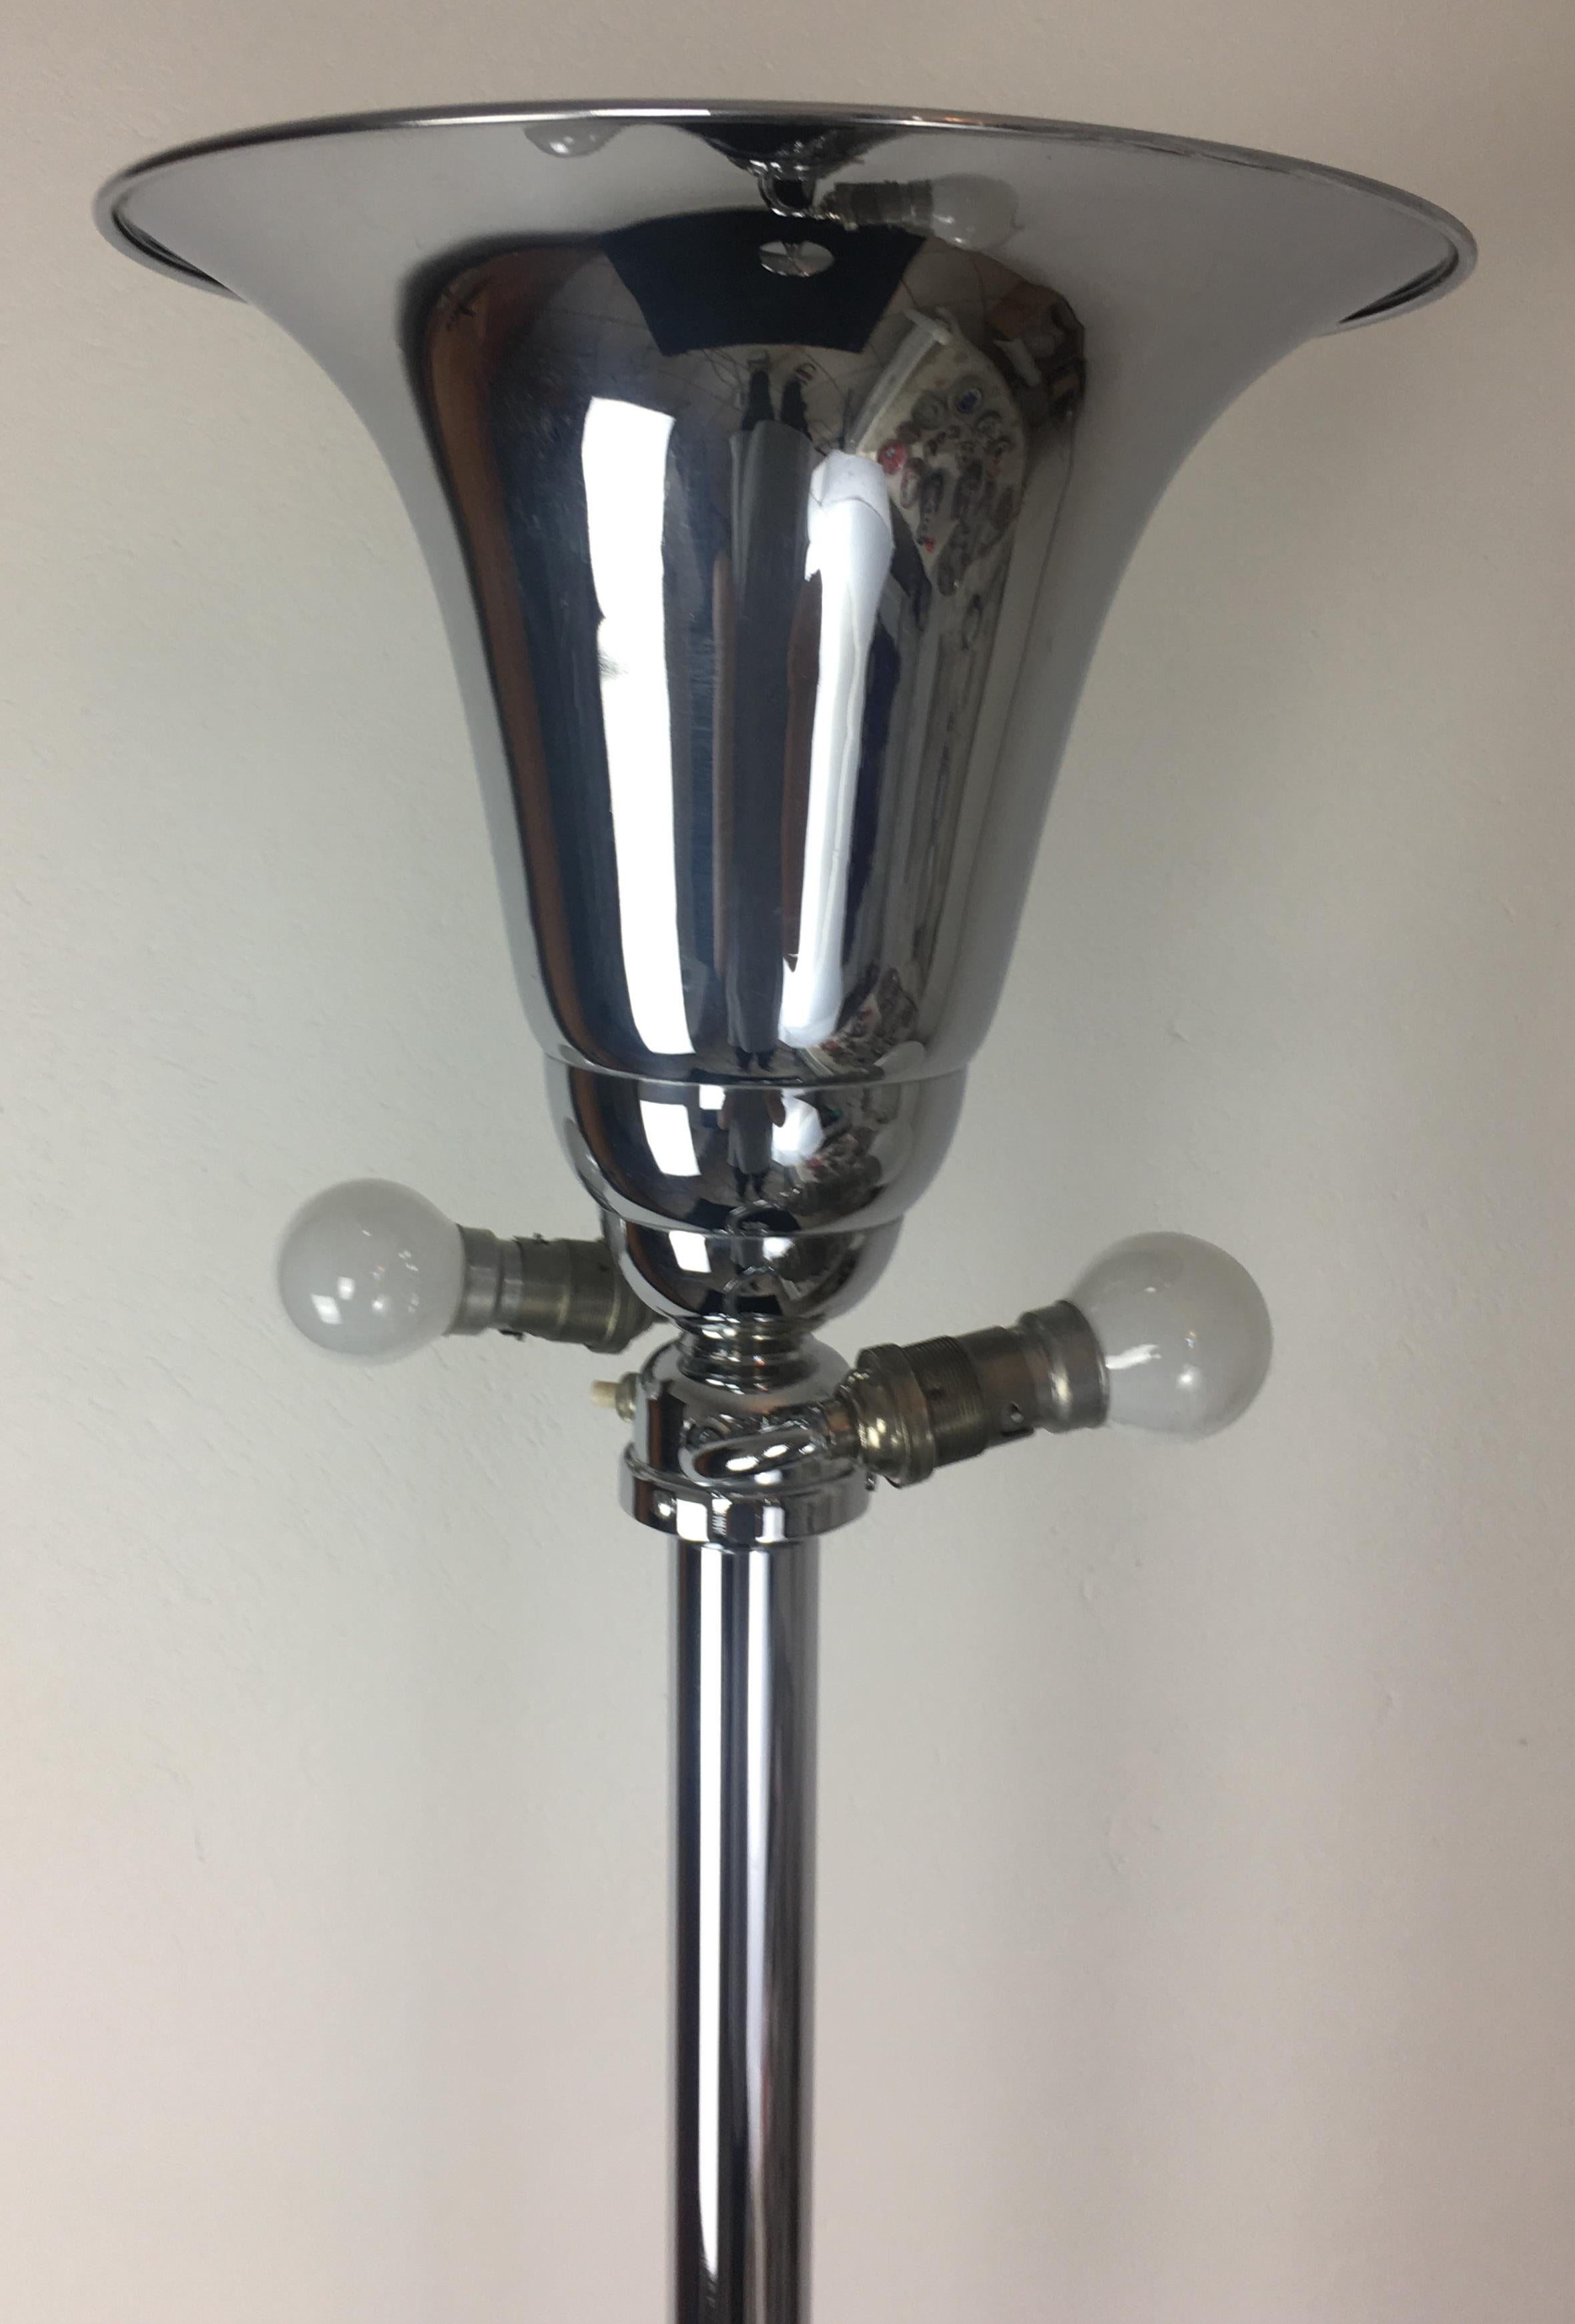 This polished chrome French Art Deco style floor lamp embodies the style and movement of the period.

Original wiring, easily adjustable for use in select destination.  
